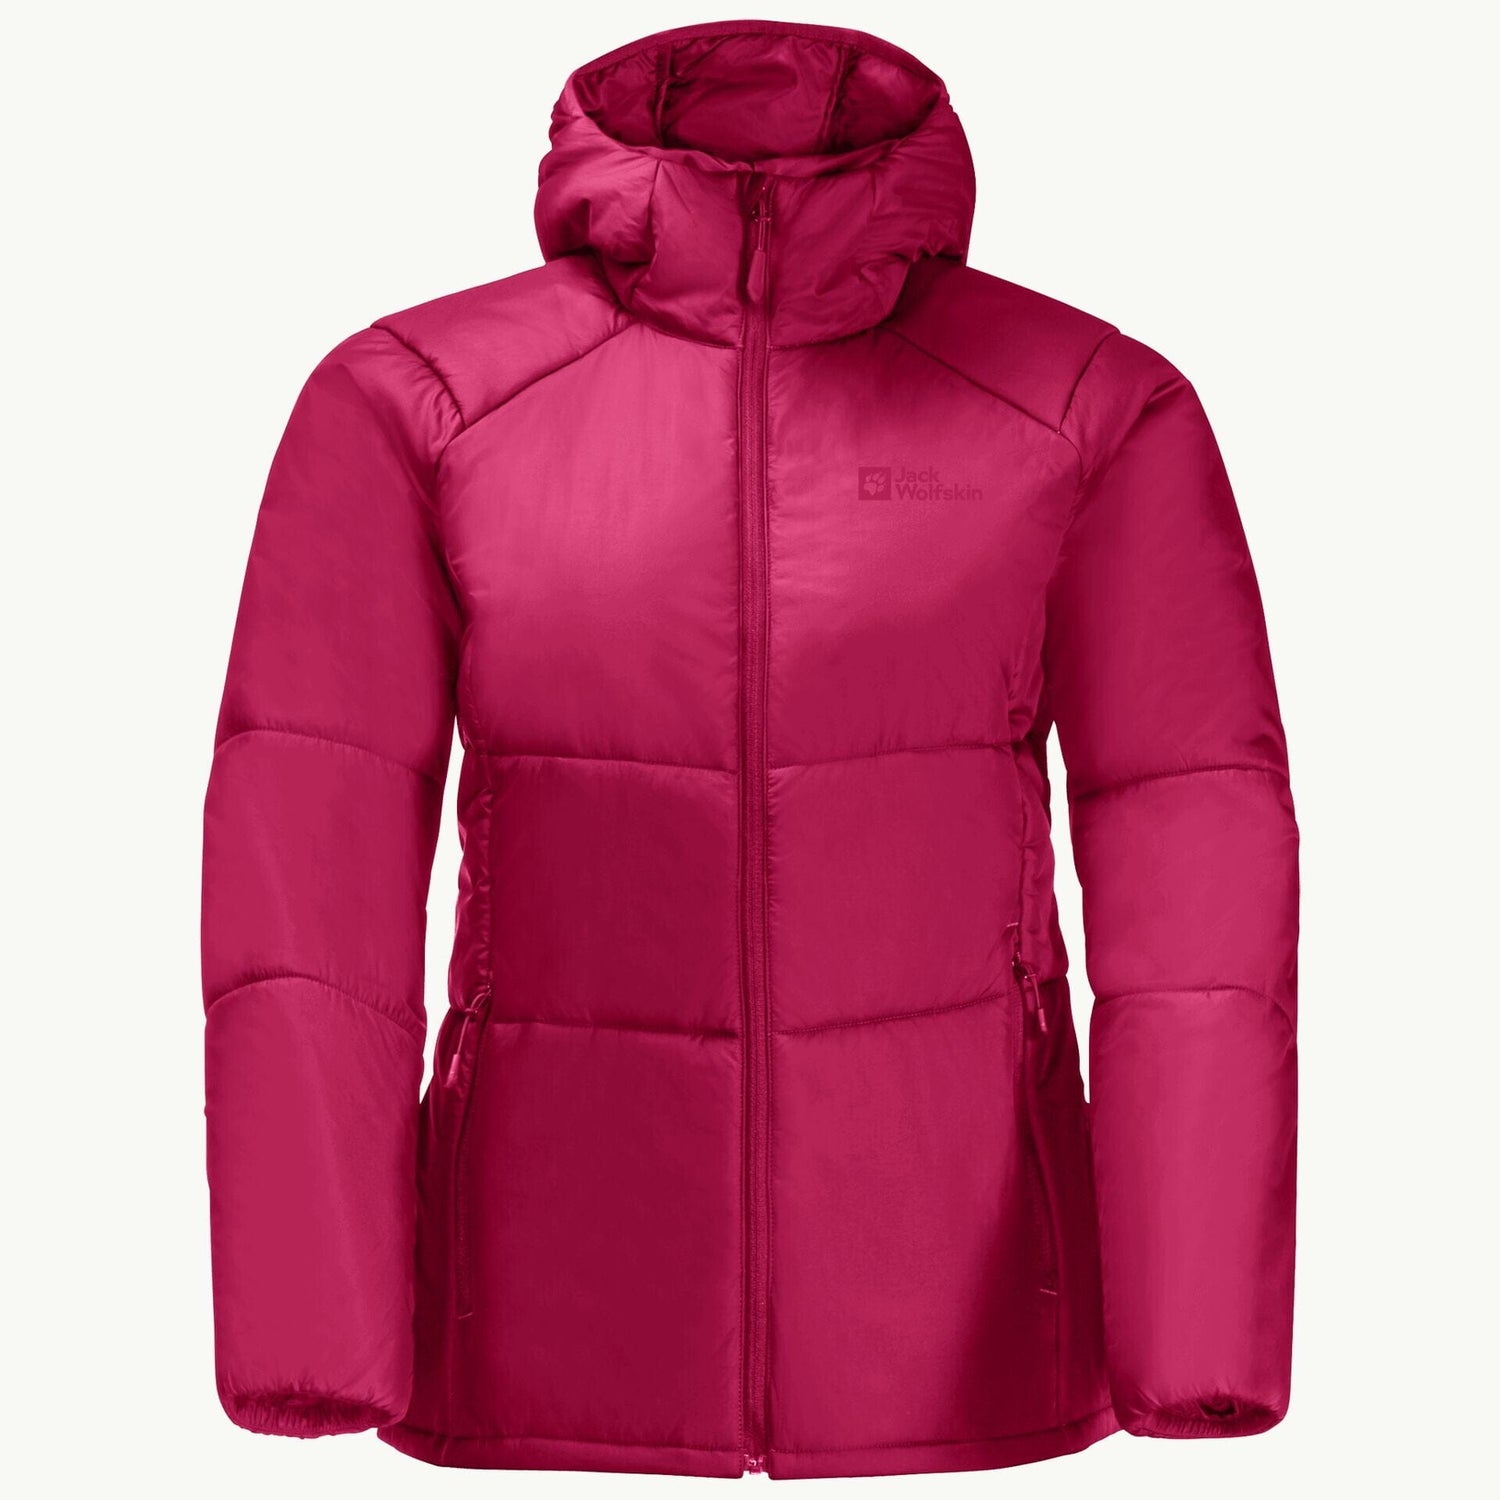 Jack Wolfskin W\'s Recycled Bergland - Hoody insulated materials Ins jacket - Weekendbee sustainable sportswear –